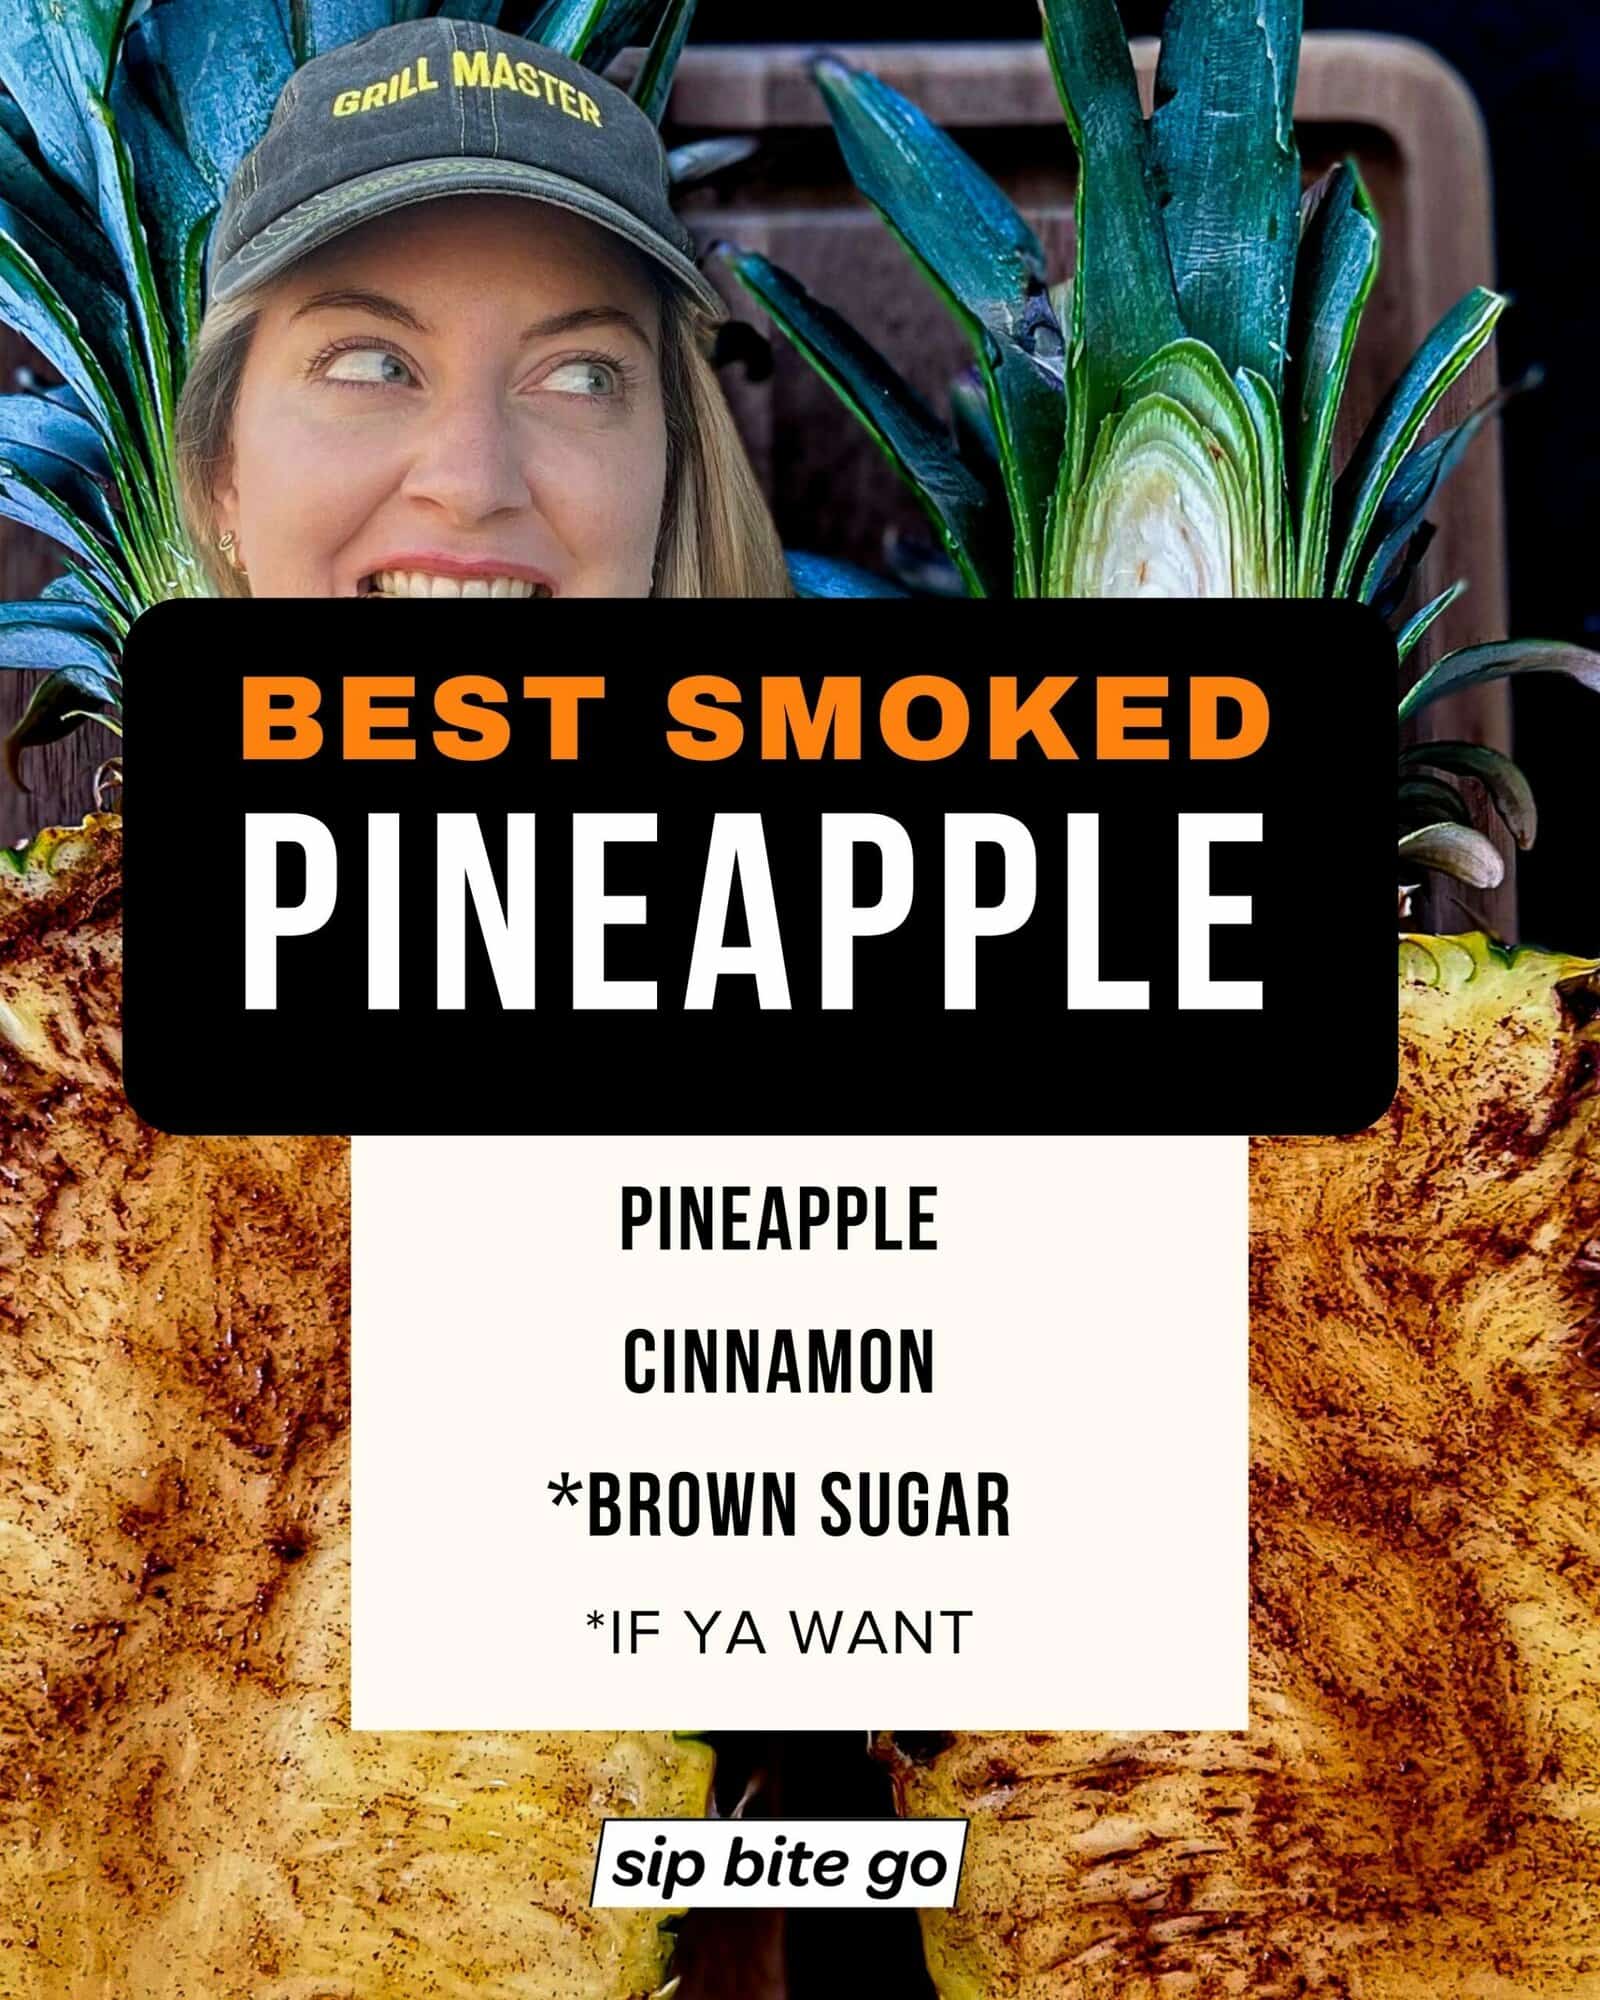 Infographic with ingredients for smoking pineapples on the Traeger pellet grill with captions and food blogger Jenna Passaro